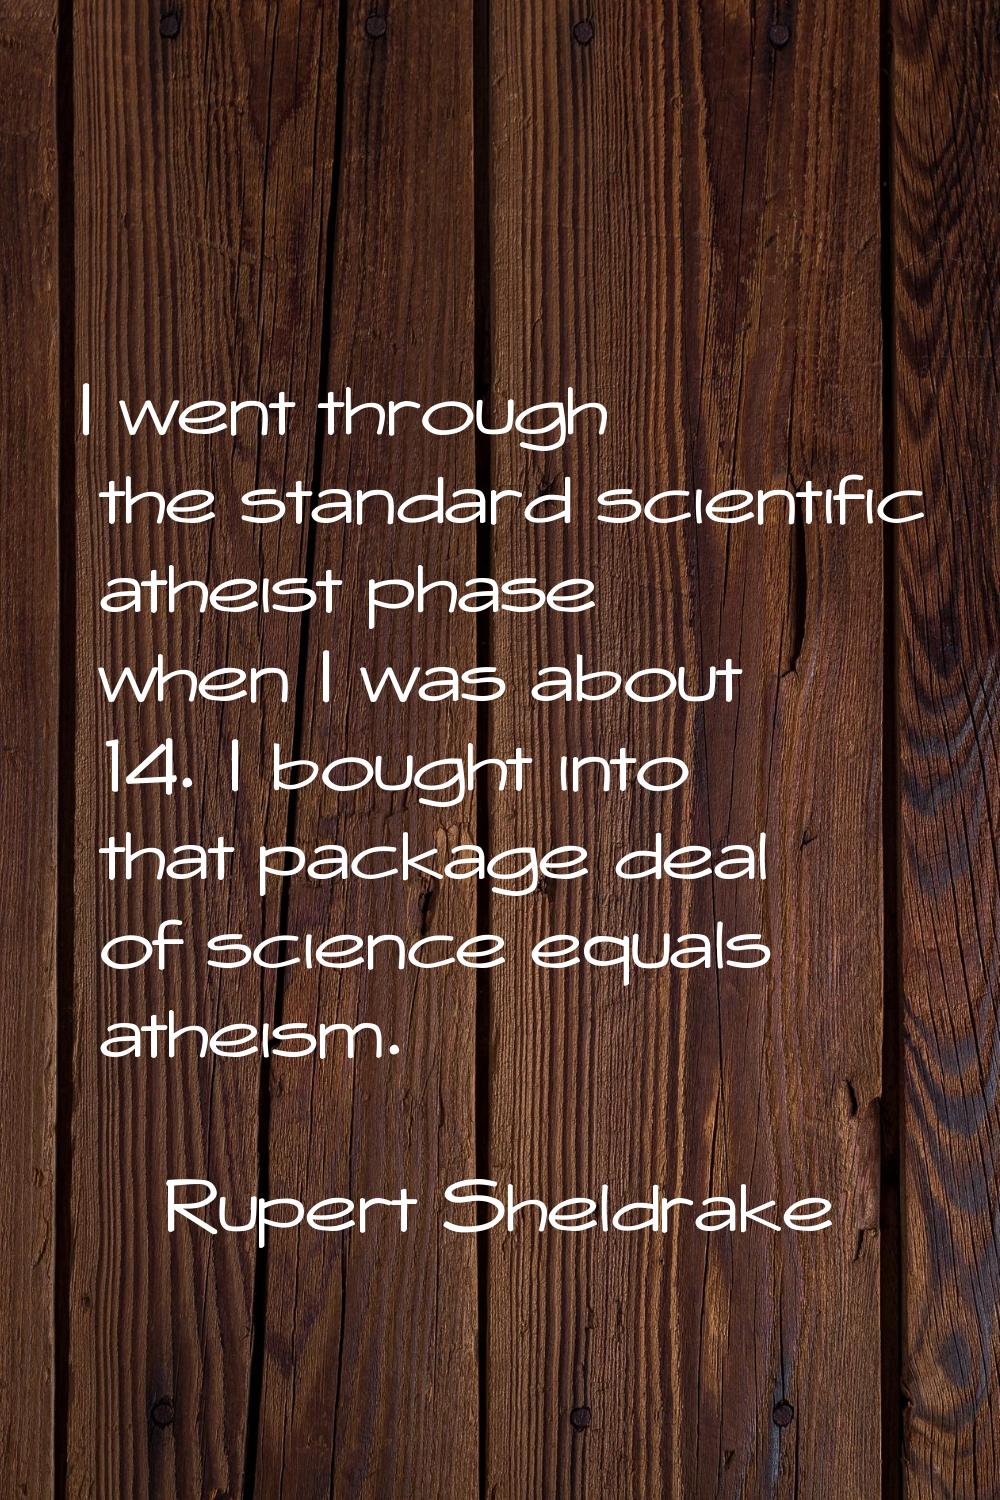 I went through the standard scientific atheist phase when I was about 14. I bought into that packag